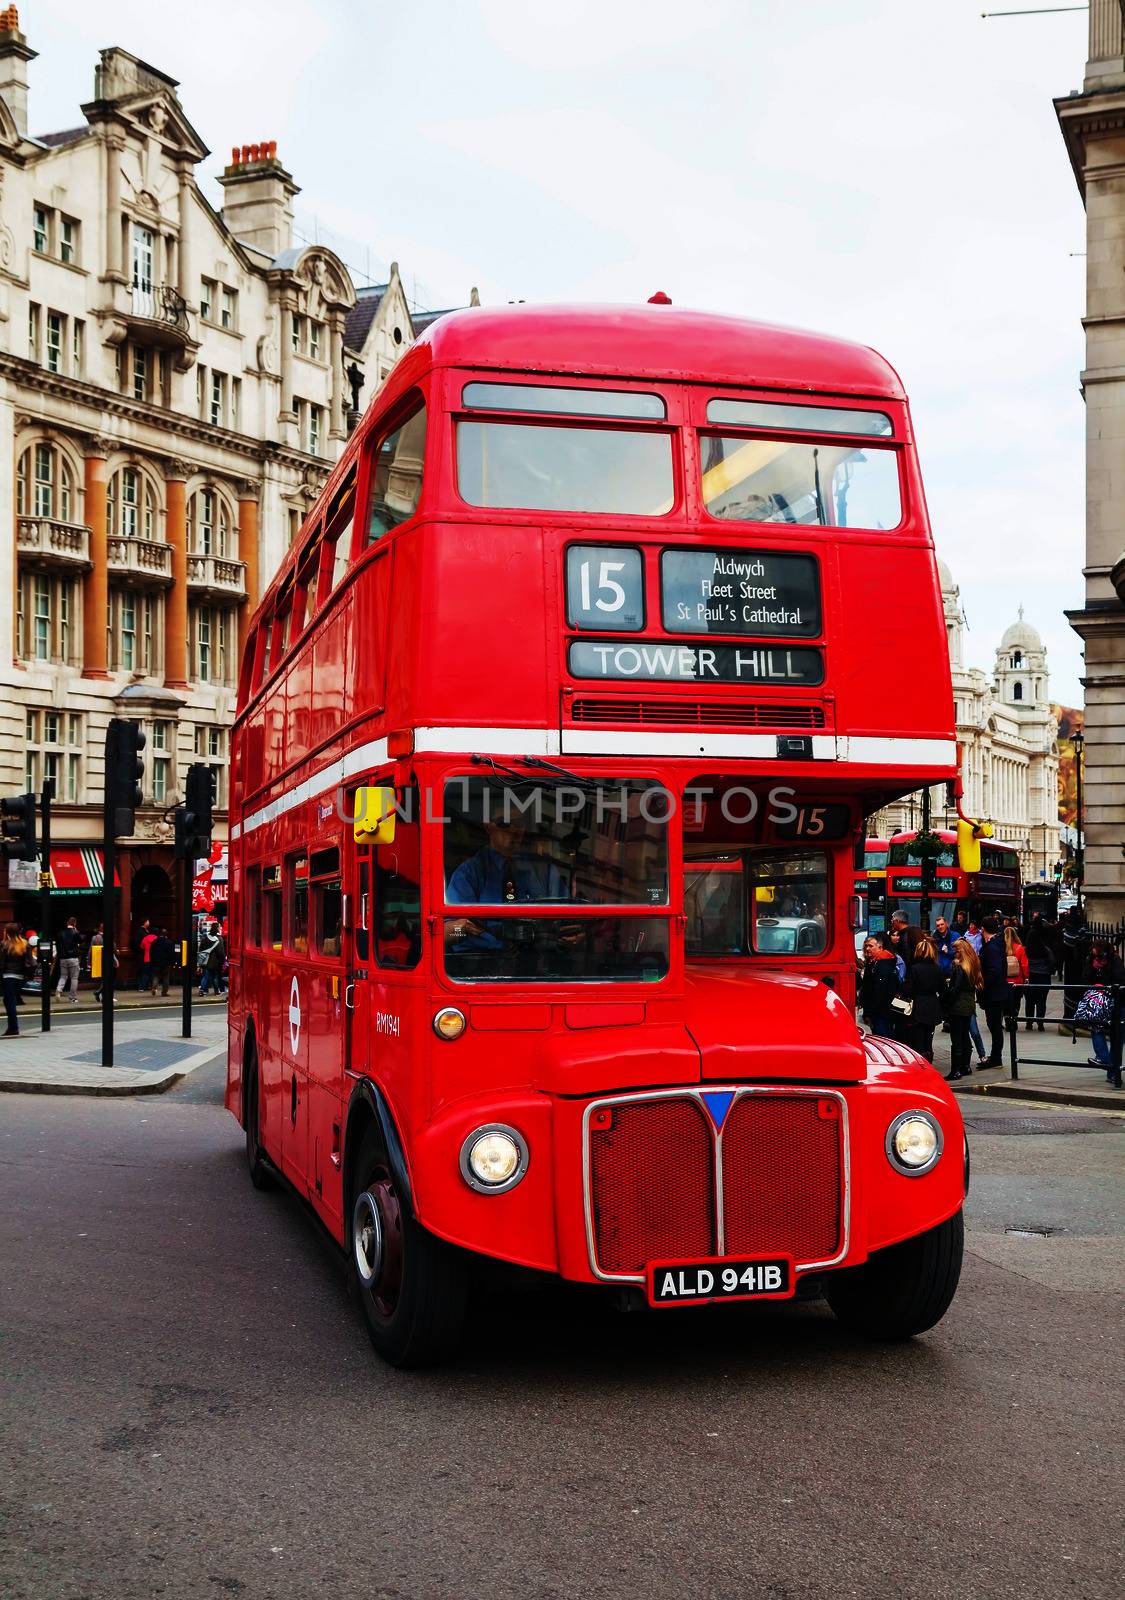 Iconic red double decker bus in London by AndreyKr